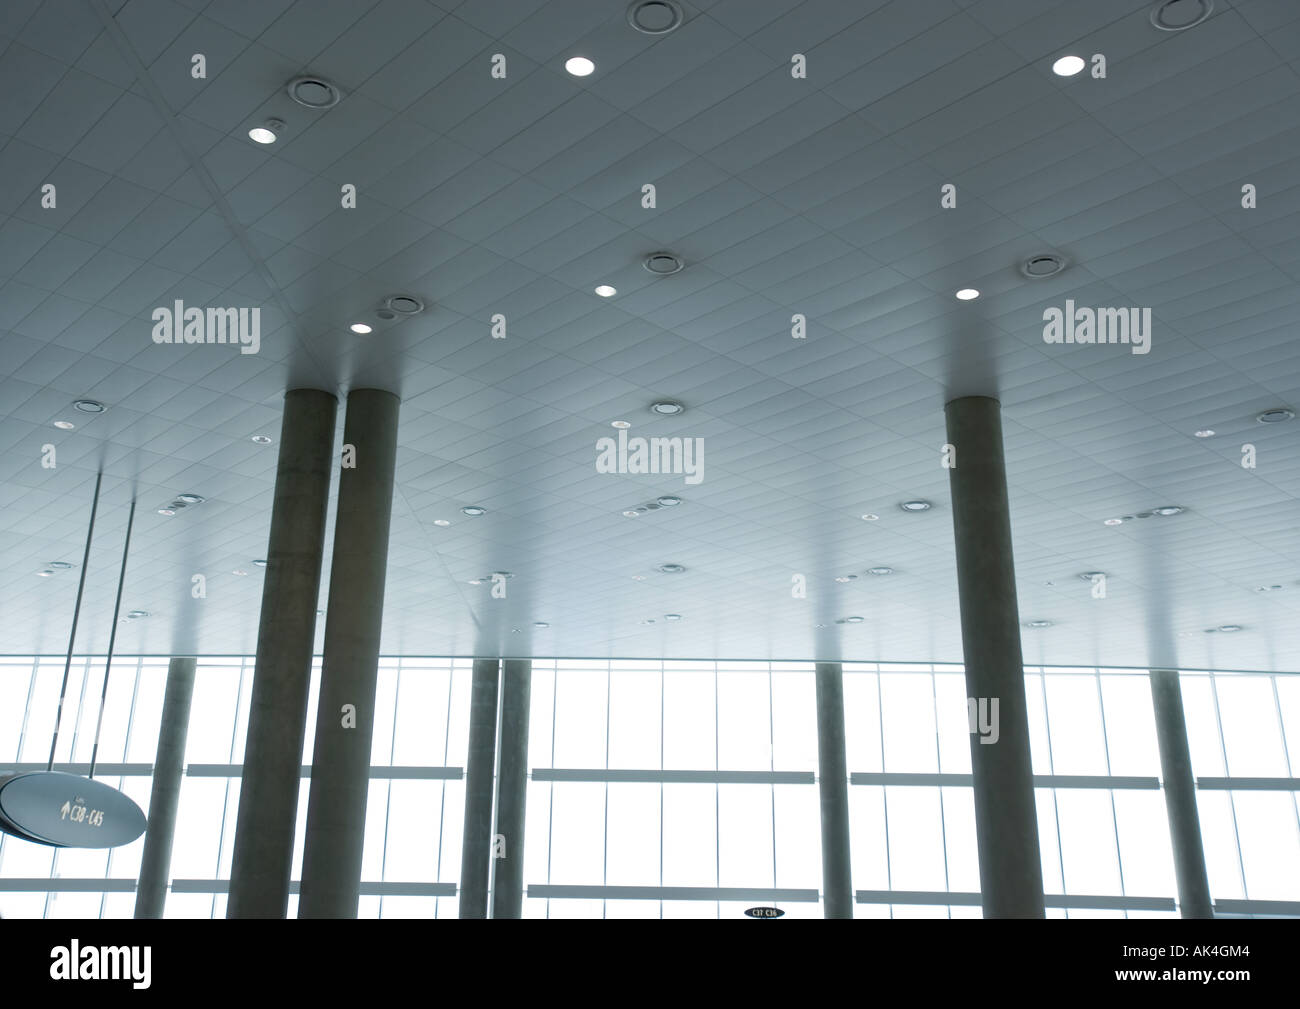 Airport interior, architectural view Stock Photo